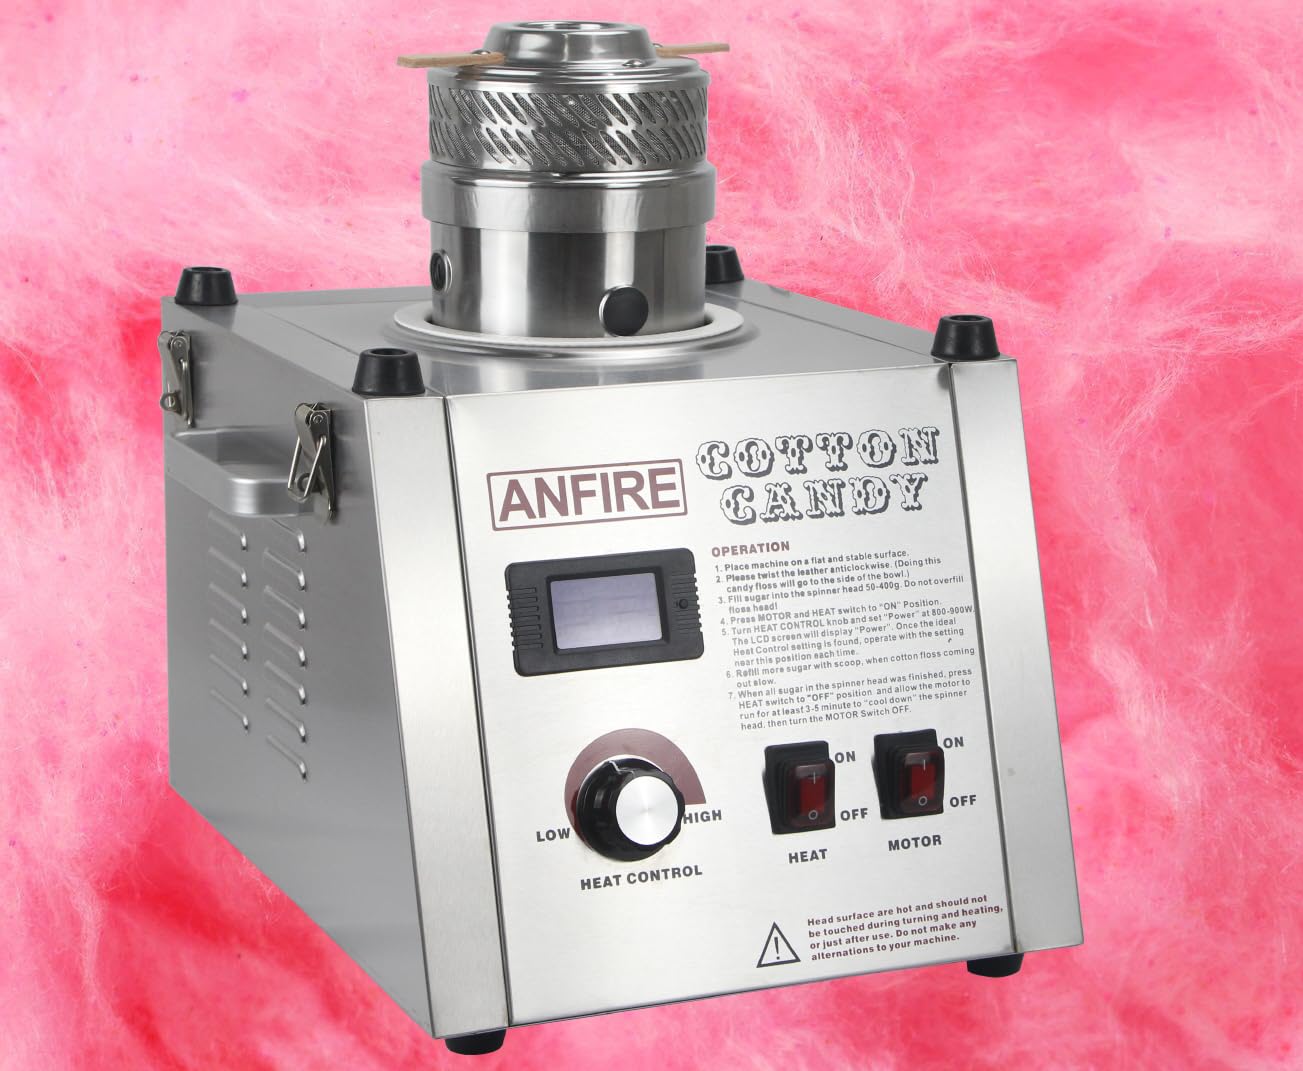 ANFIRE Commercial Professional Cotton Candy Machine 5